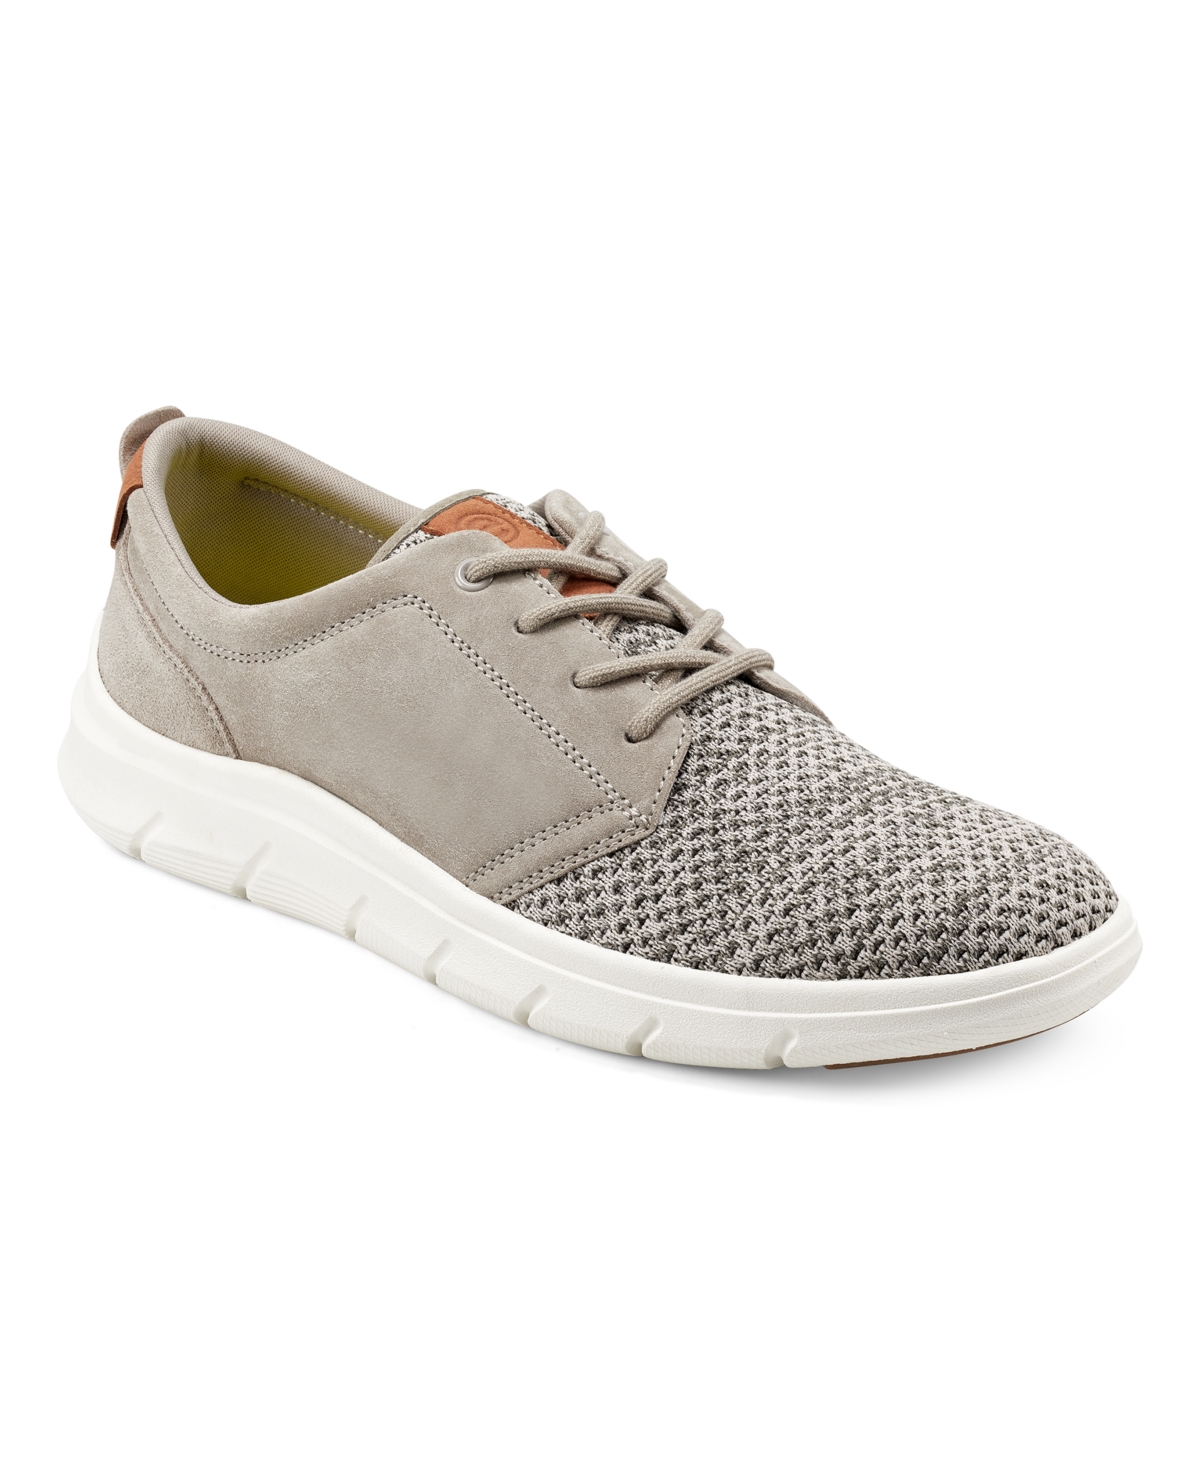 Men's Canyon Casual Sneakers - Taupe